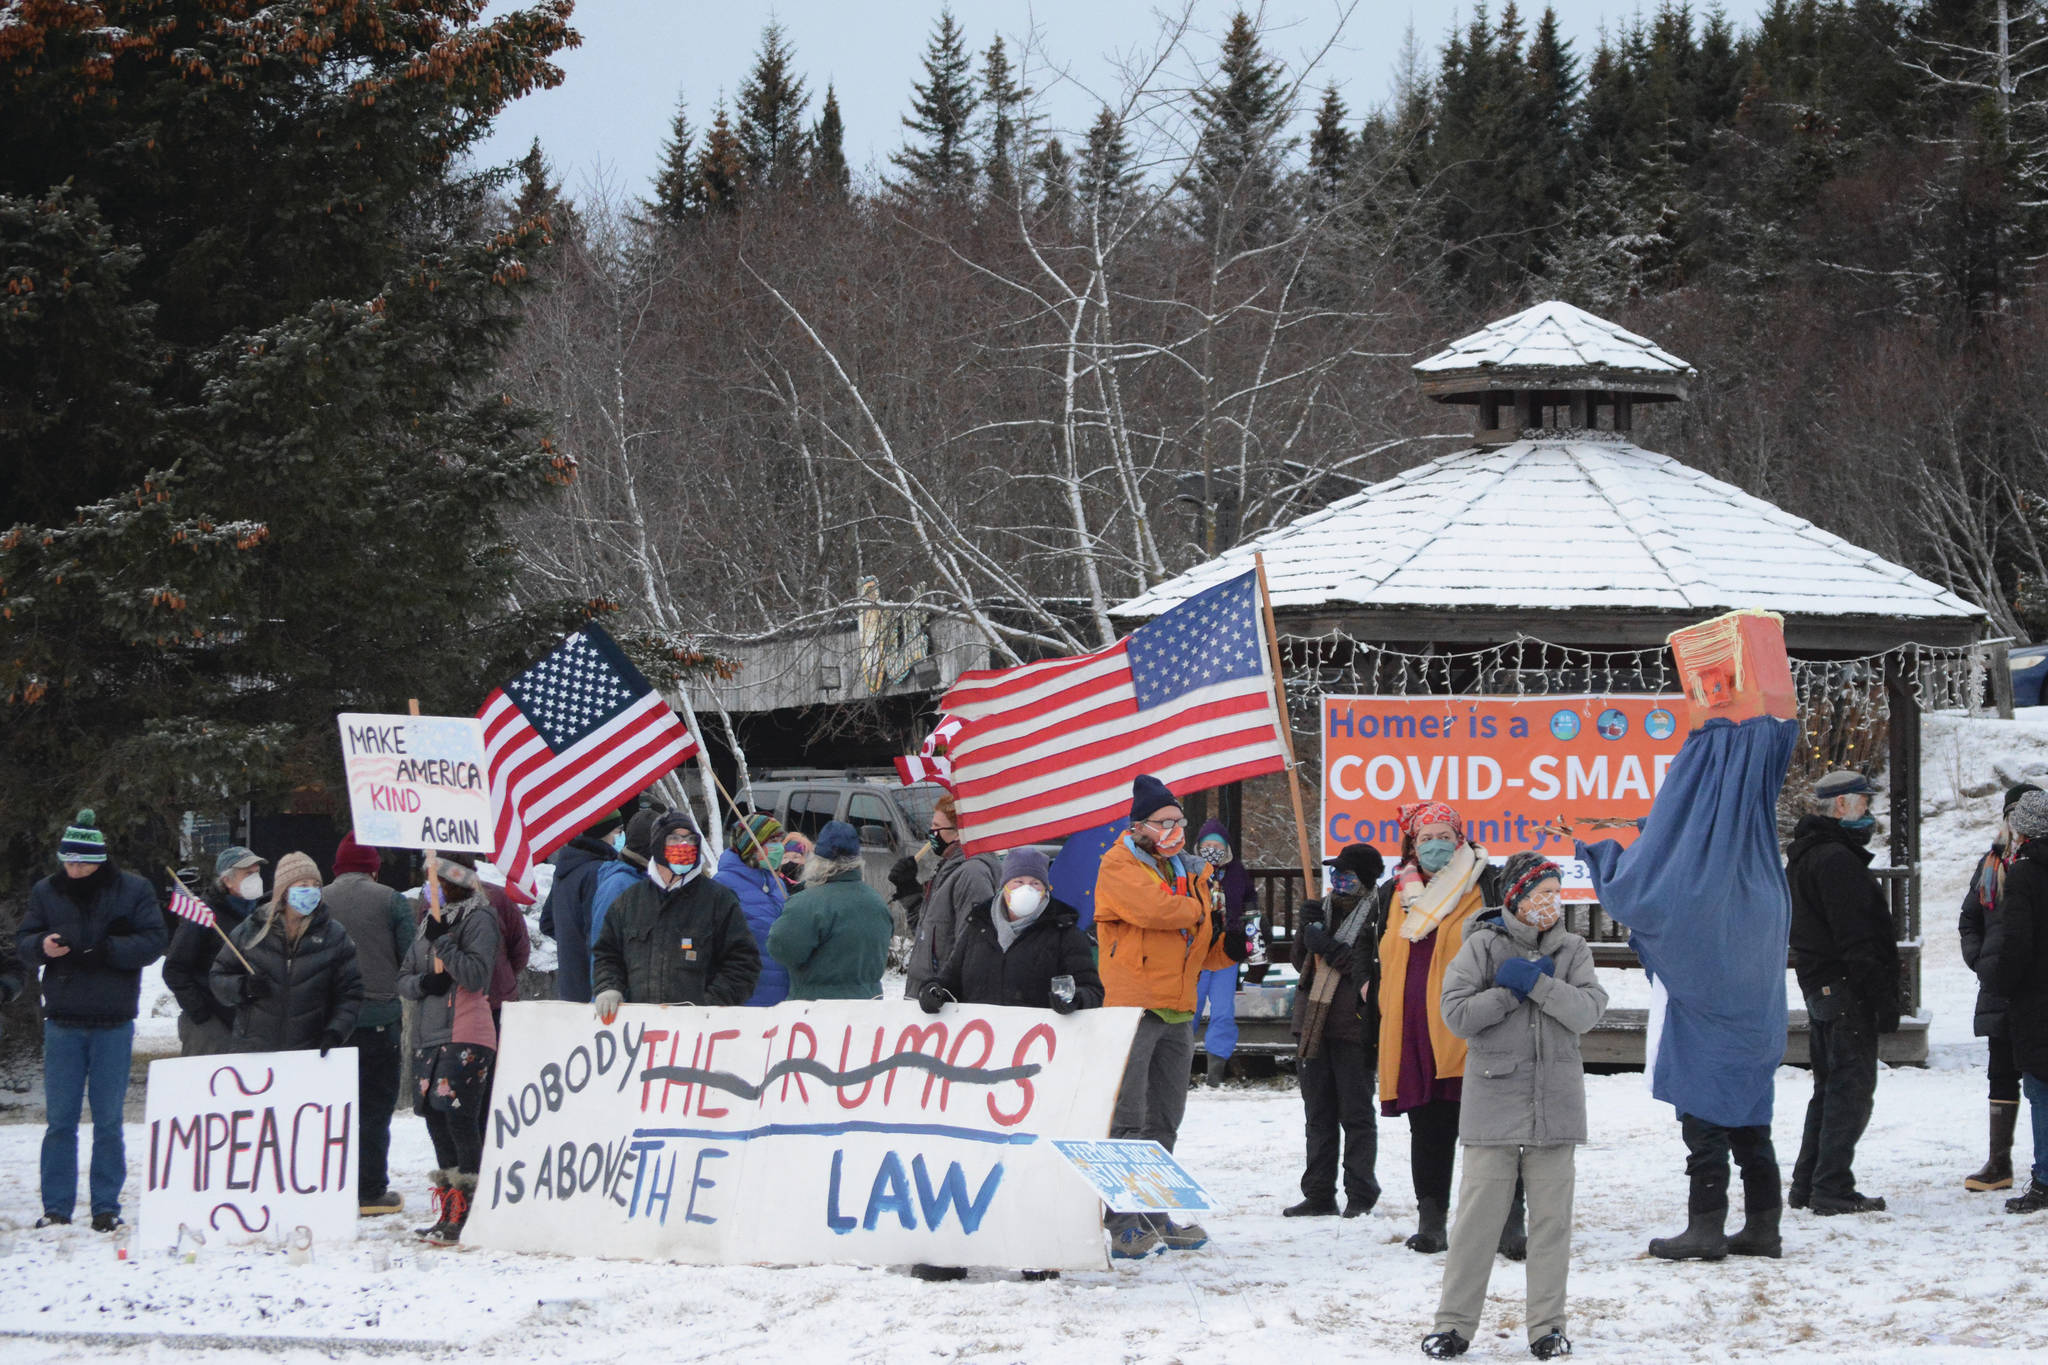 About 50 people protest the Jan. 6, 2021, riot at the U.S. Capitol on Saturday, Jan. 9, 2021, at WKFL Park in Homer, Alaska. The group reacted to the events in which rioters broke into the U.S. Capitol while Congress attempted to tally the Electoral College results in which former Vice President Joe Biden won the presidential election. Charles Aguilar, far right, wore a Trump puppet costume. (Photo by Michael Armstrong/Homer News)